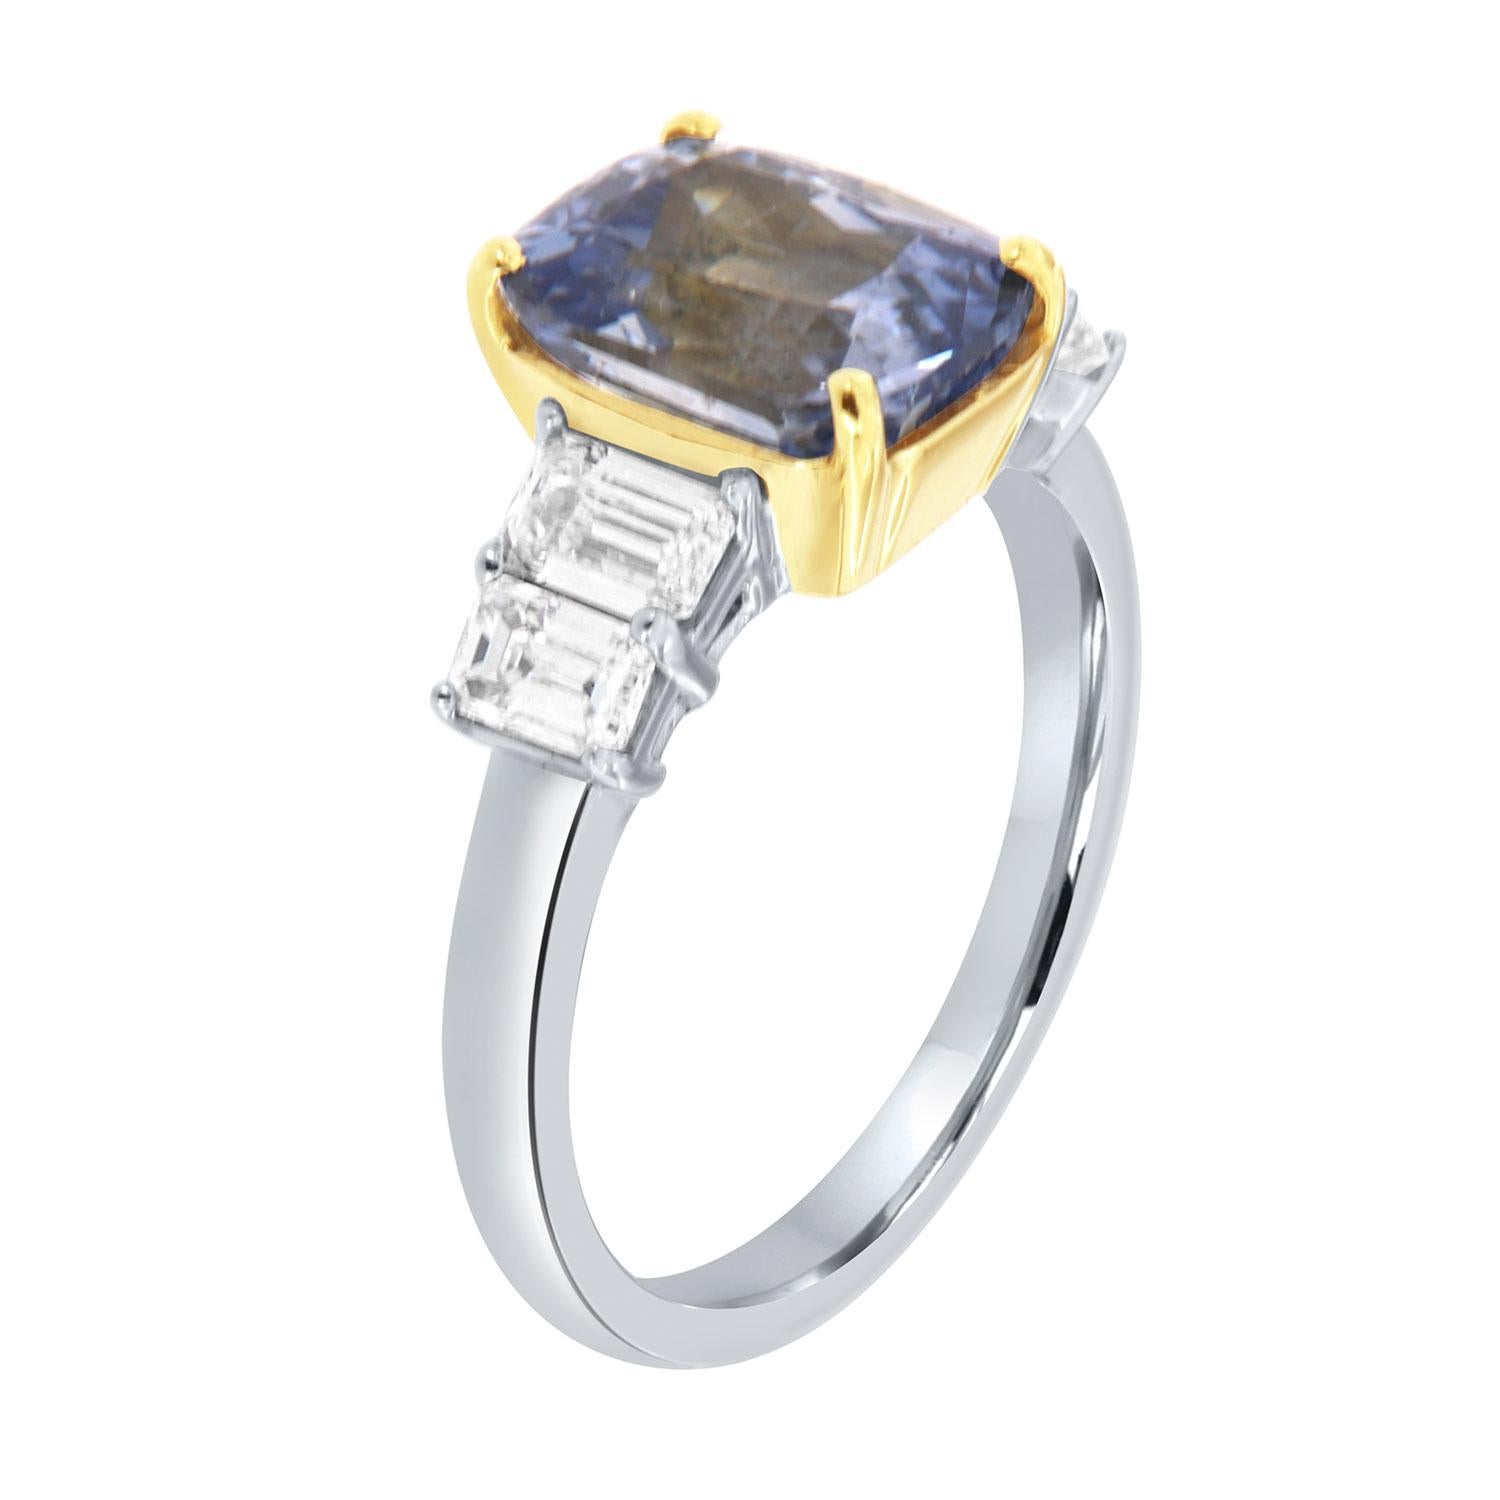 This stunning ring features a violetish blue 3.55 Carat Sri-Lankan Sapphire set in an 18k Yellow gold cup flanked by four emerald shape diamonds, 0.90-carat total weight, F in color, and VS1 in clarity on an 18k white gold 2.4 mm band. The sapphire